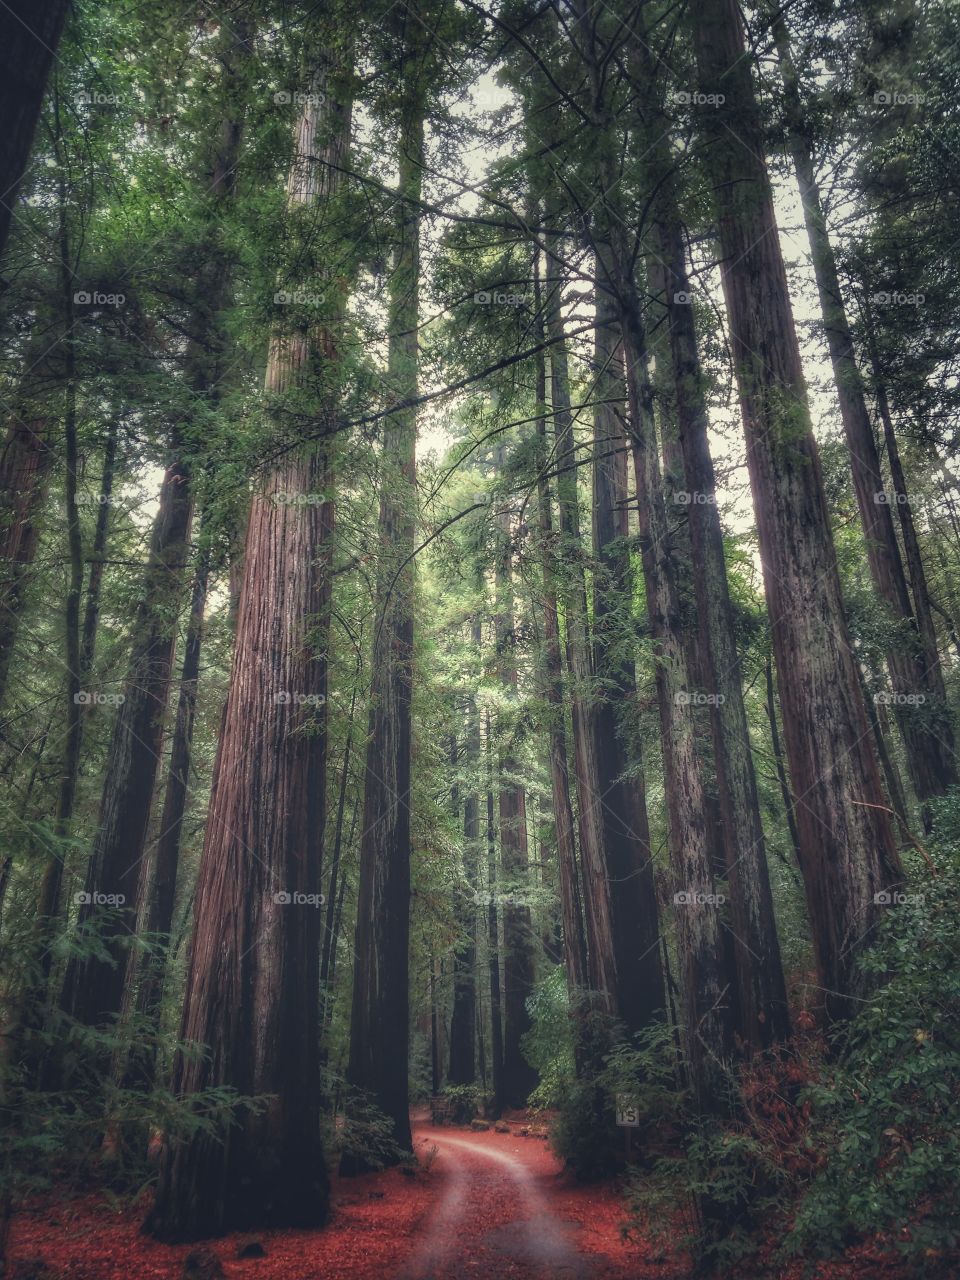 Fall in the Redwood Forest